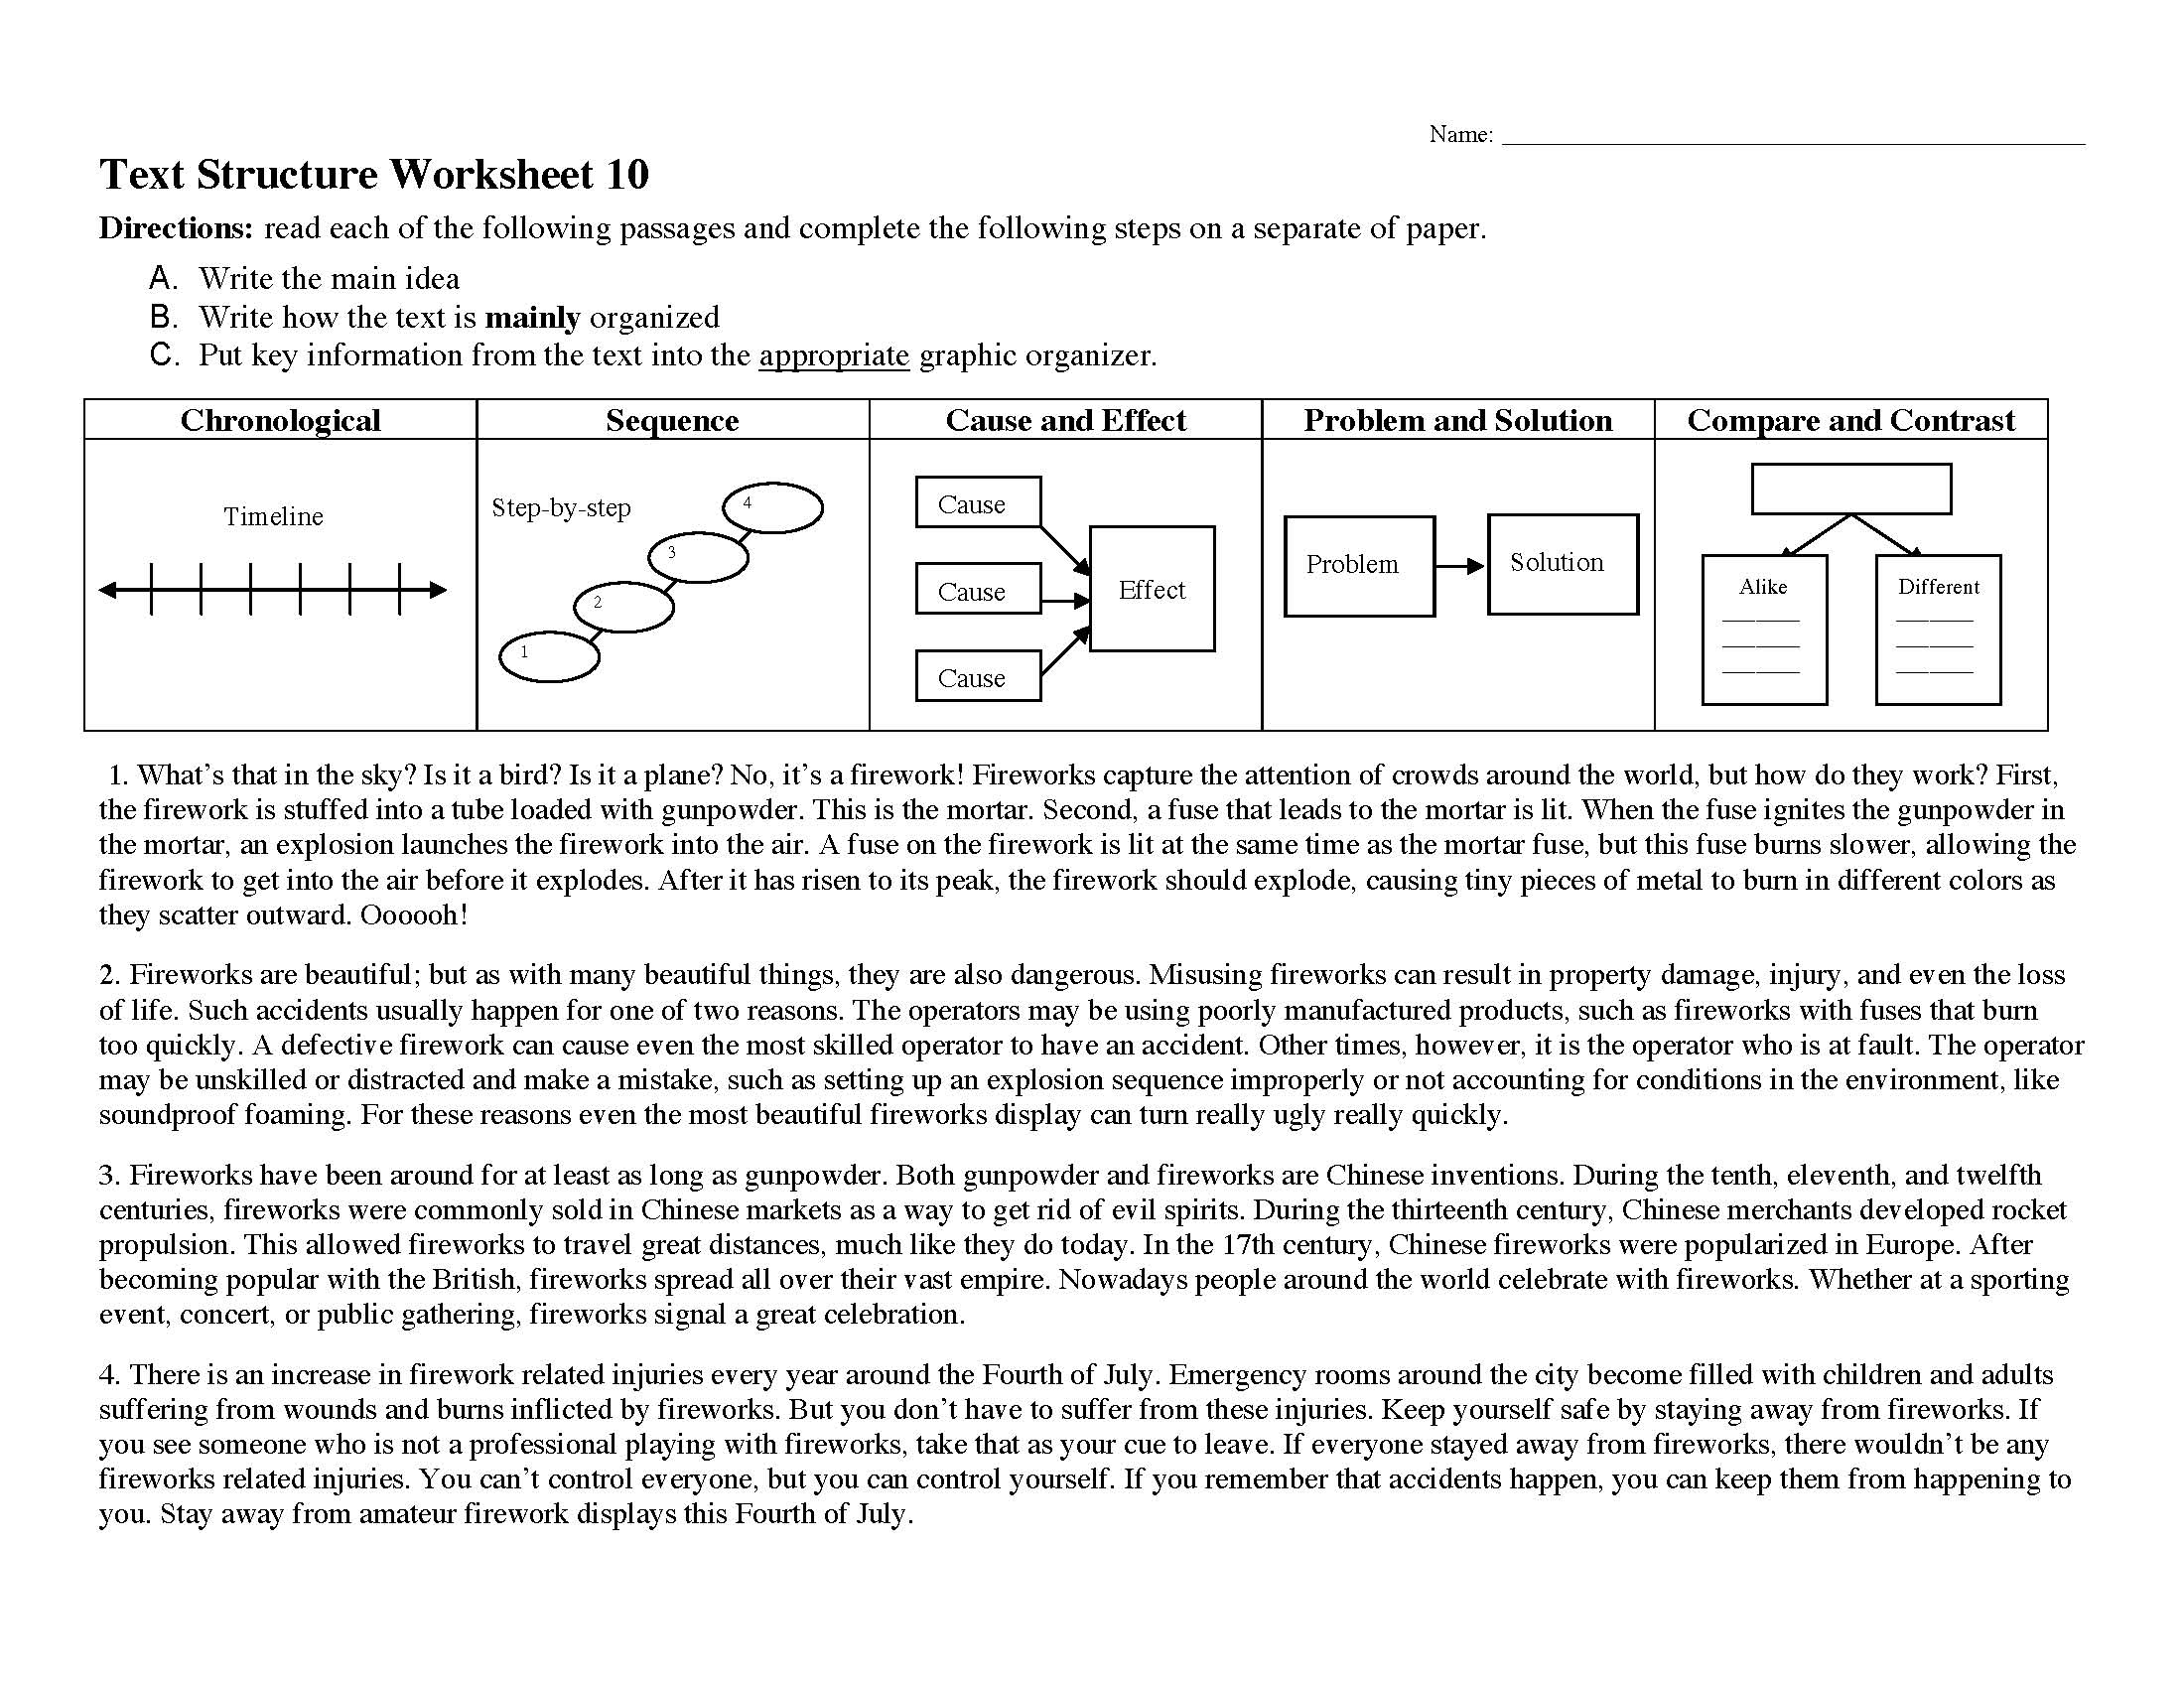 This is a preview image of the Text Structure Worksheet 10.